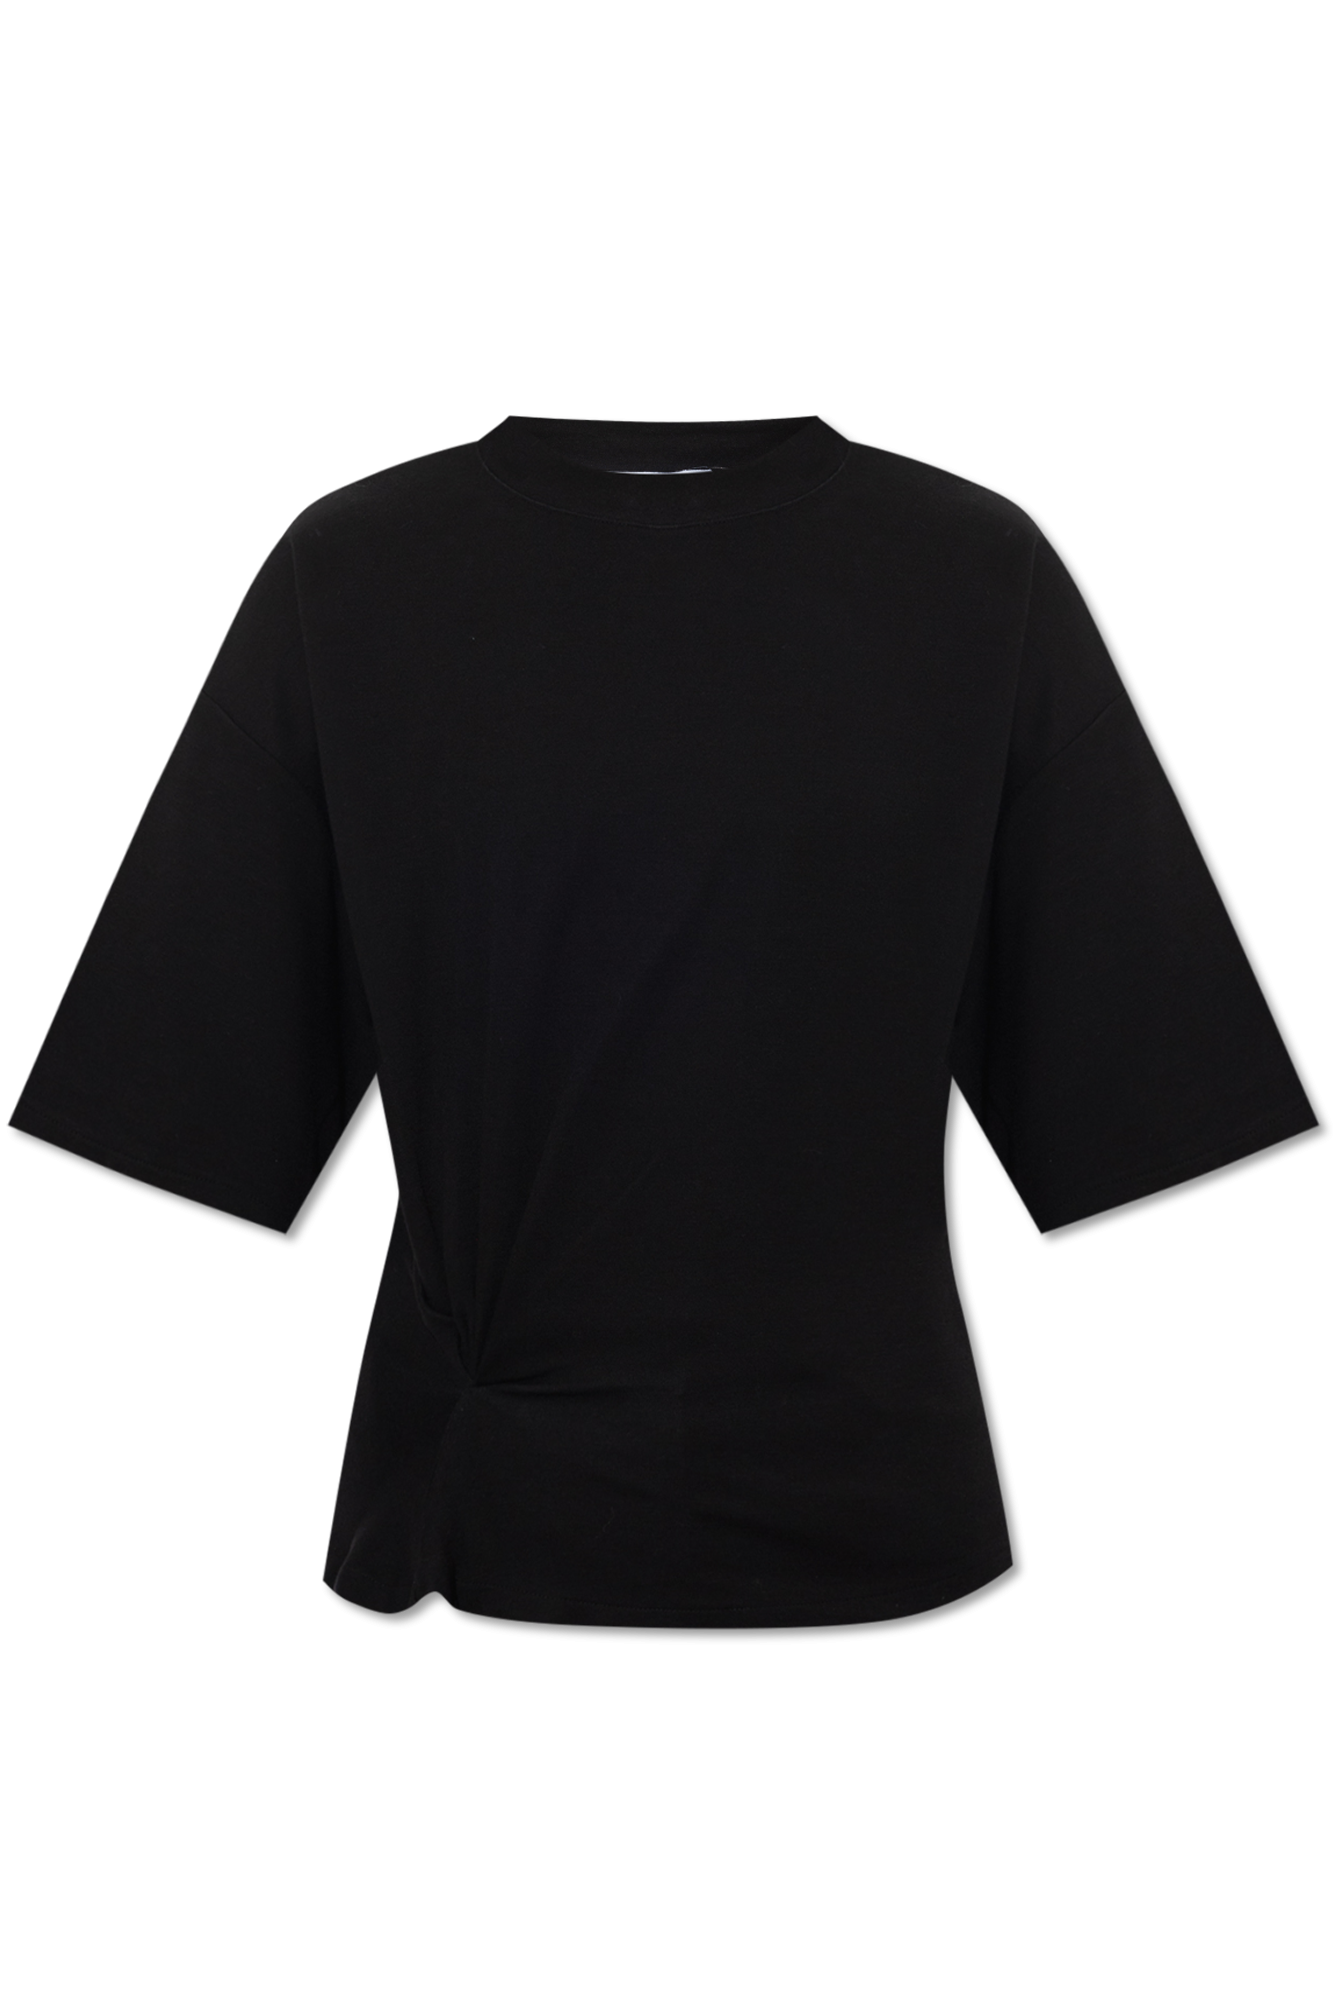 white Keep crew sweater shirt IetpShops T - from - Norway this \'Garcia\' - refined Black things with belts Iro